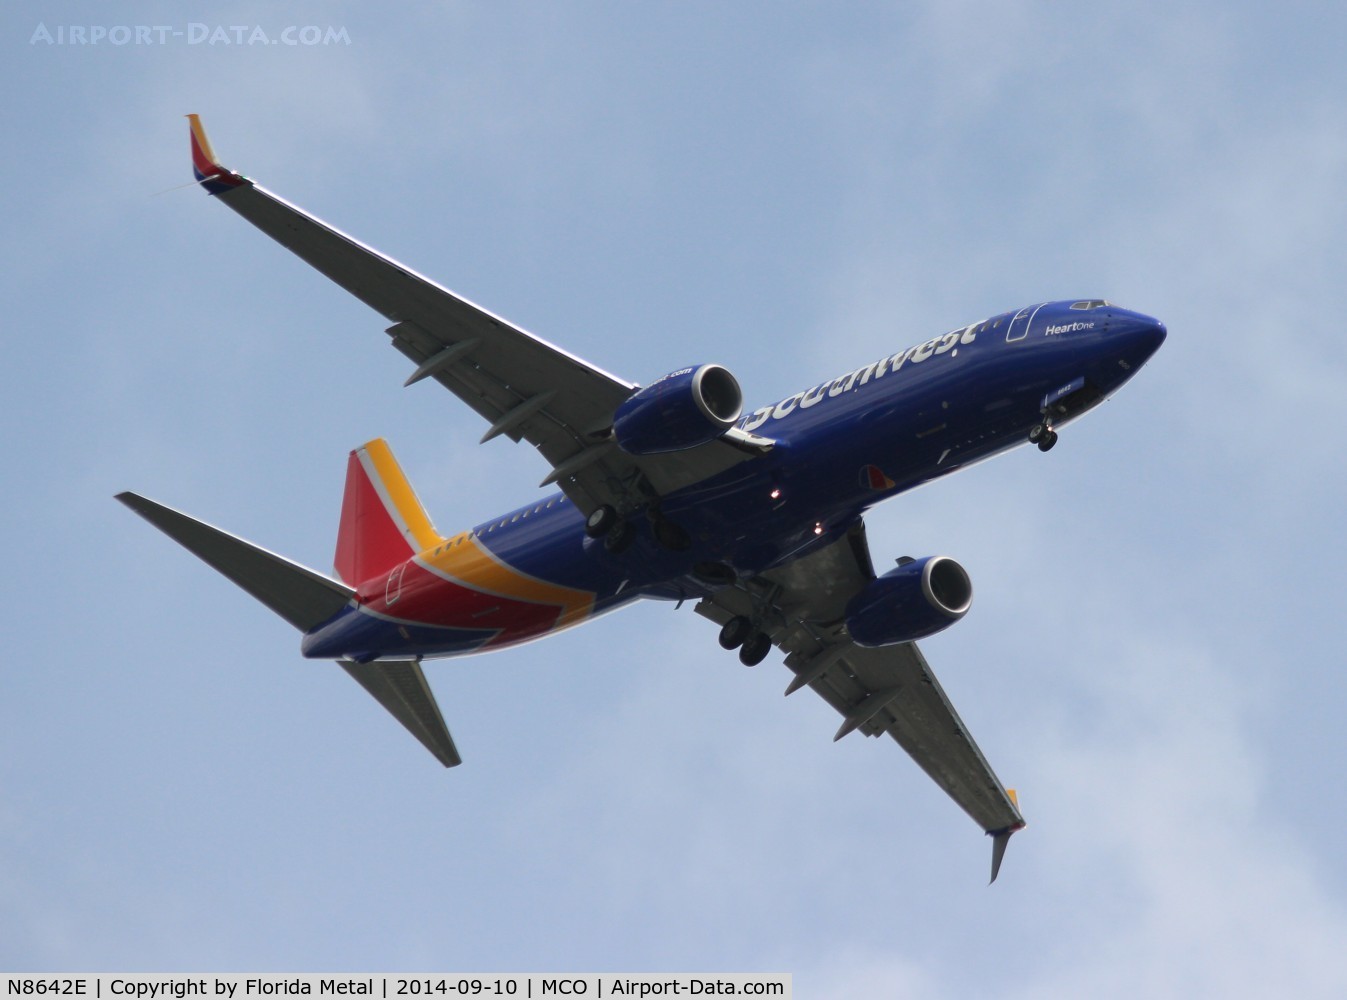 N8642E, 2014 Boeing 737-8H4 C/N 42525, Southwest brand new livery 2 days after reveal of 